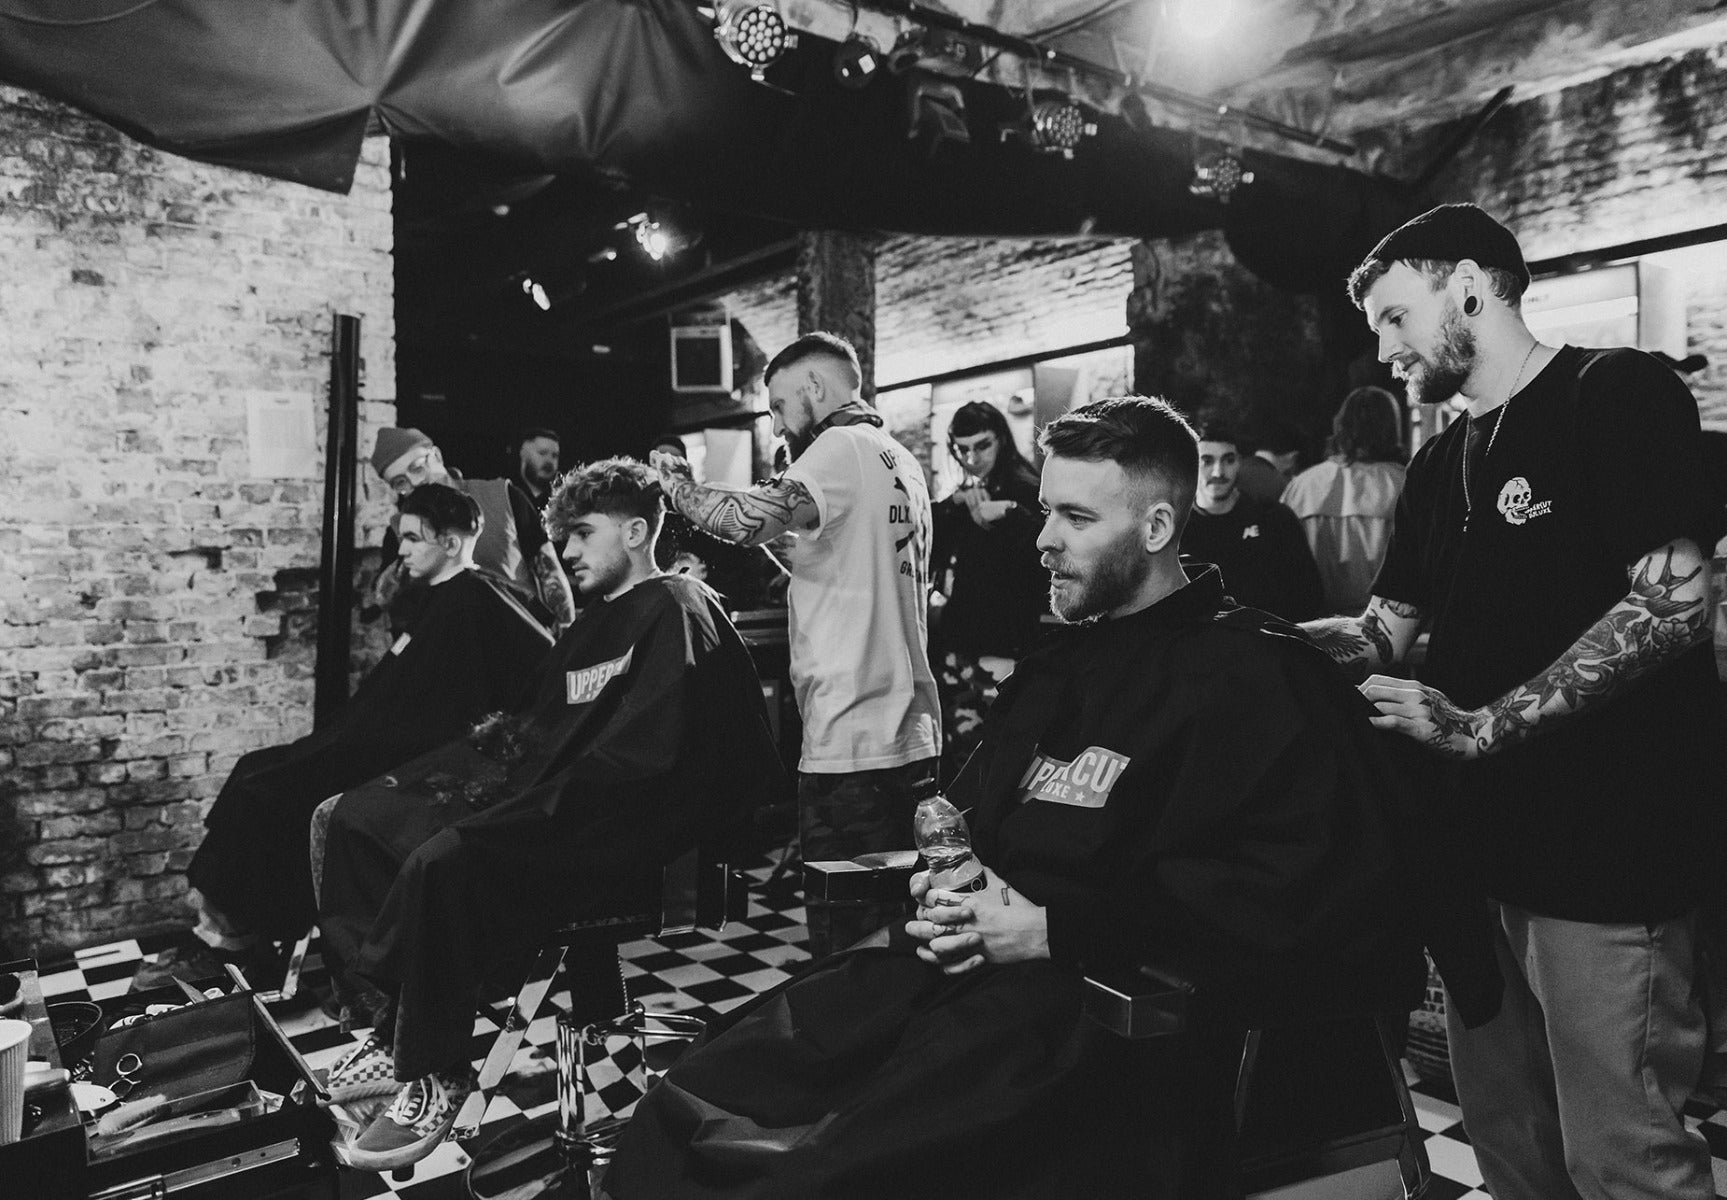 Men in barberchairs getting haircuts